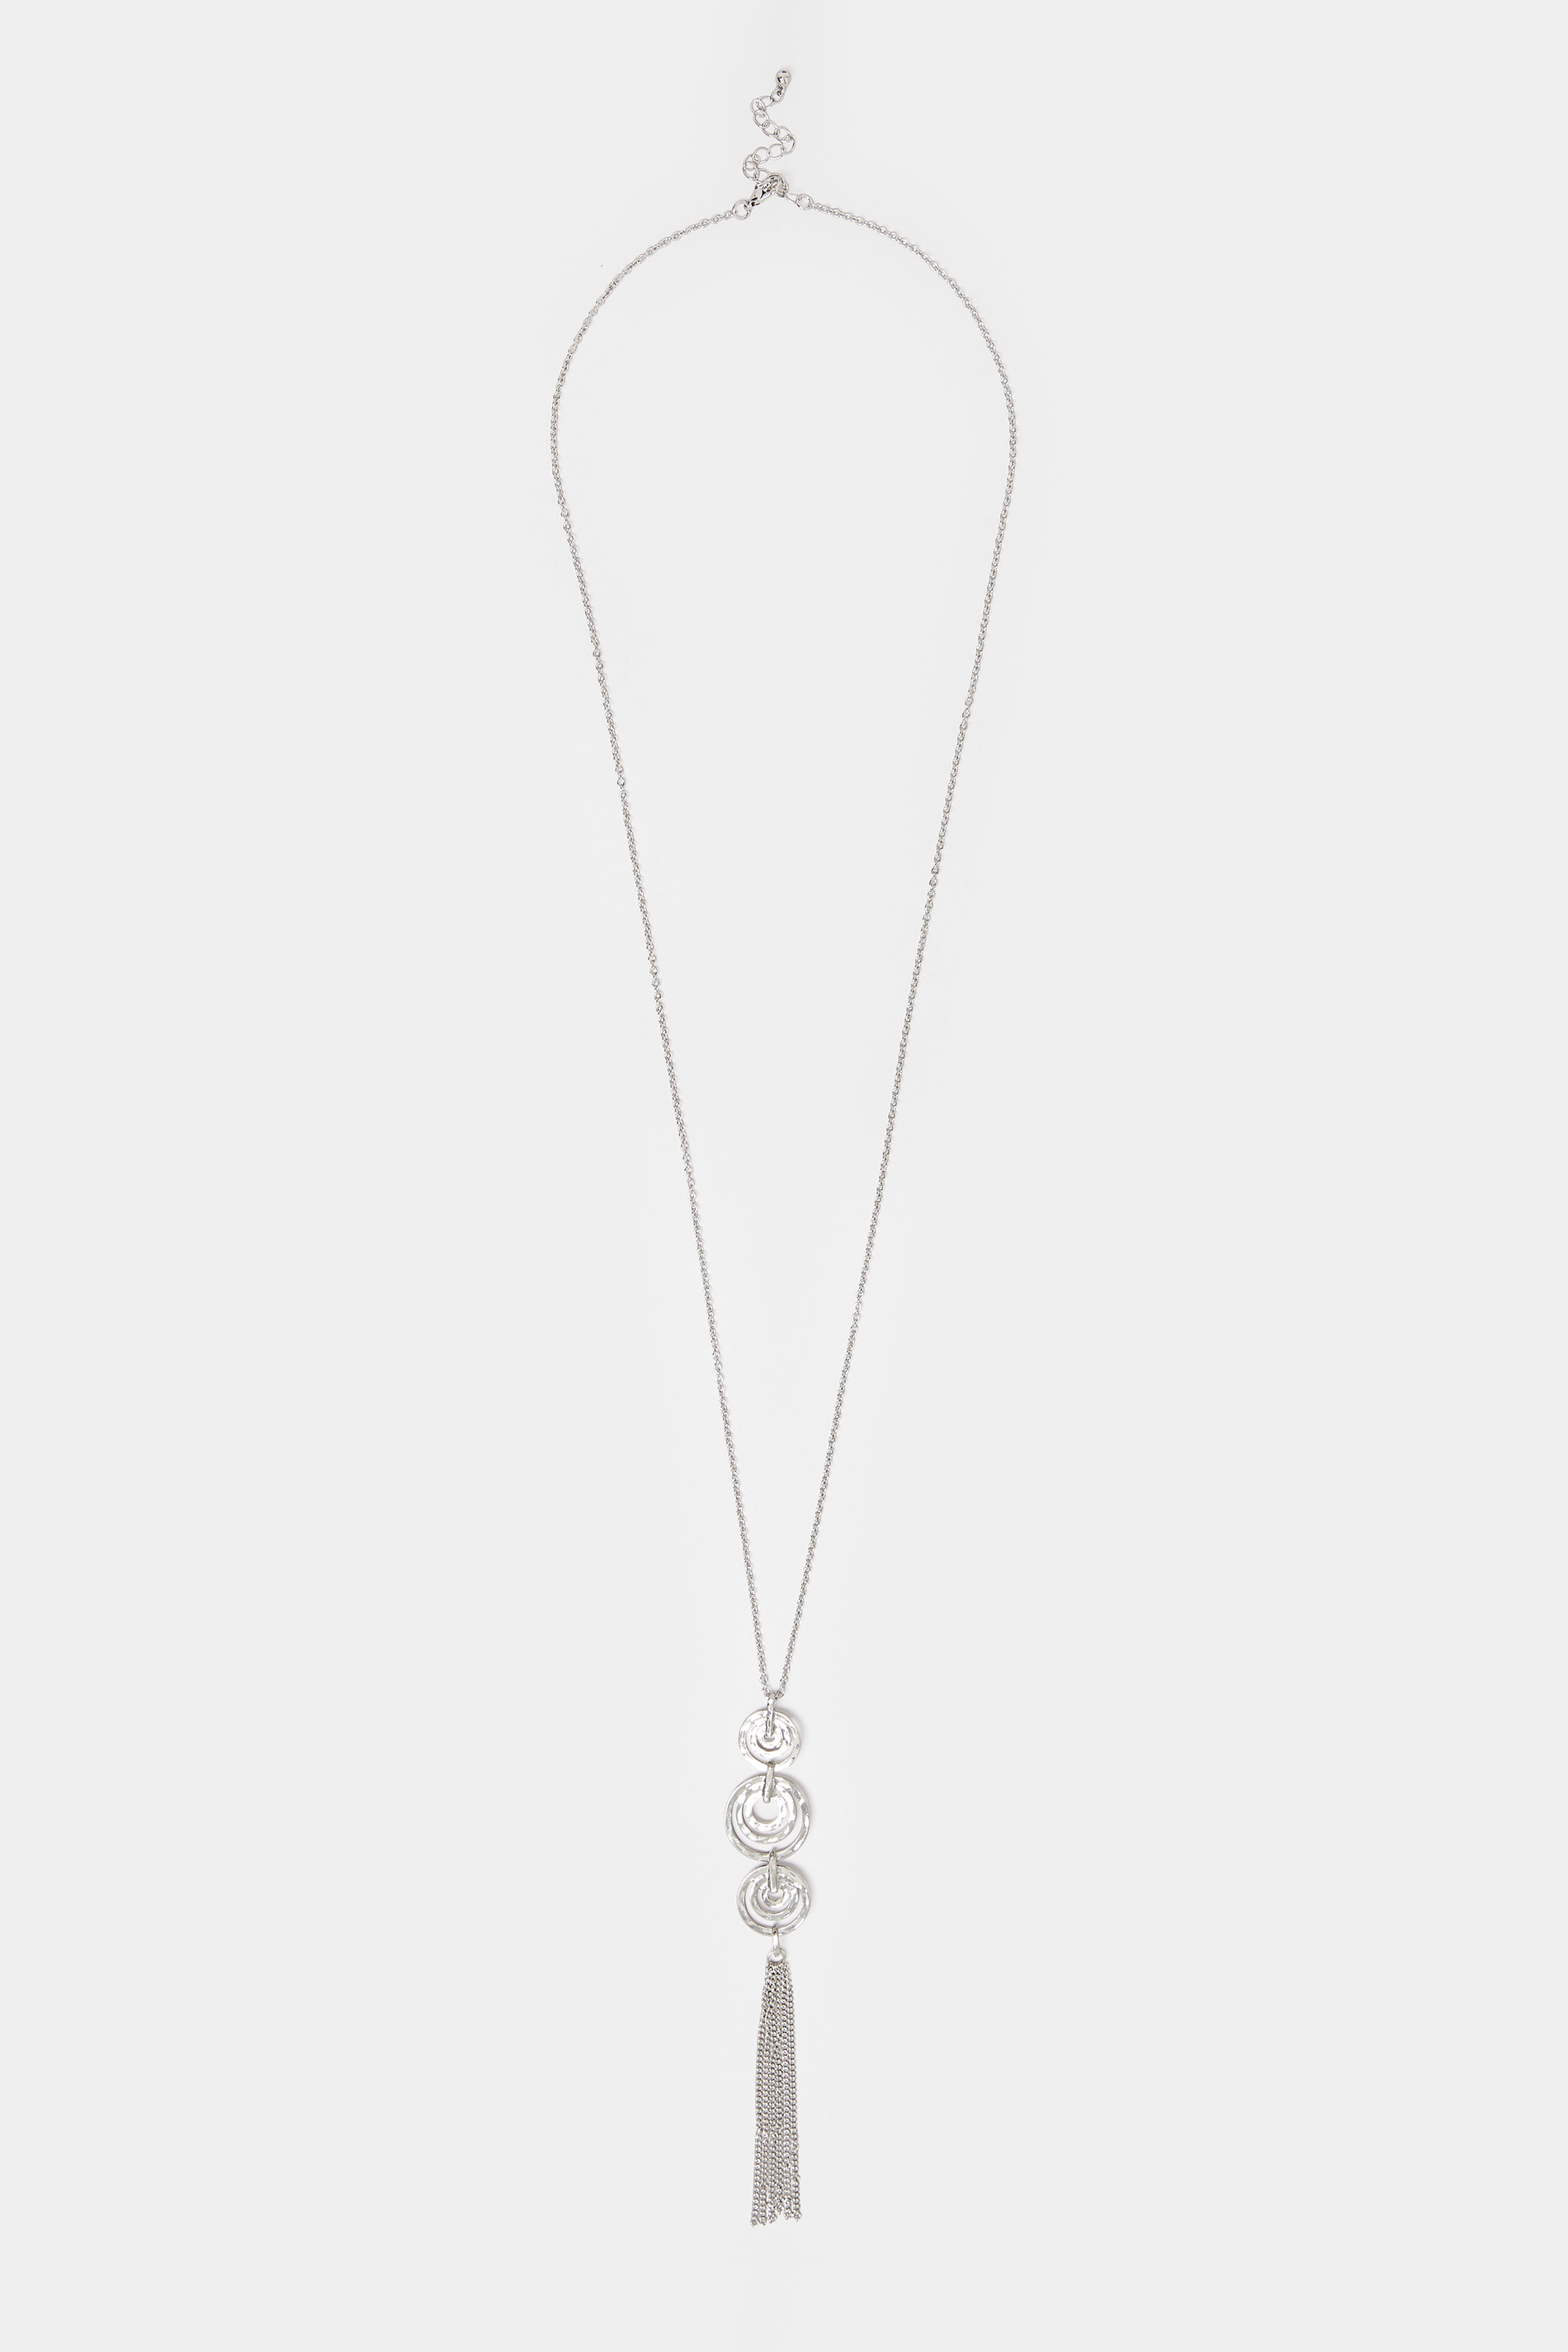 Silver Long Circle Tassle Necklace | Yours Clothing  2